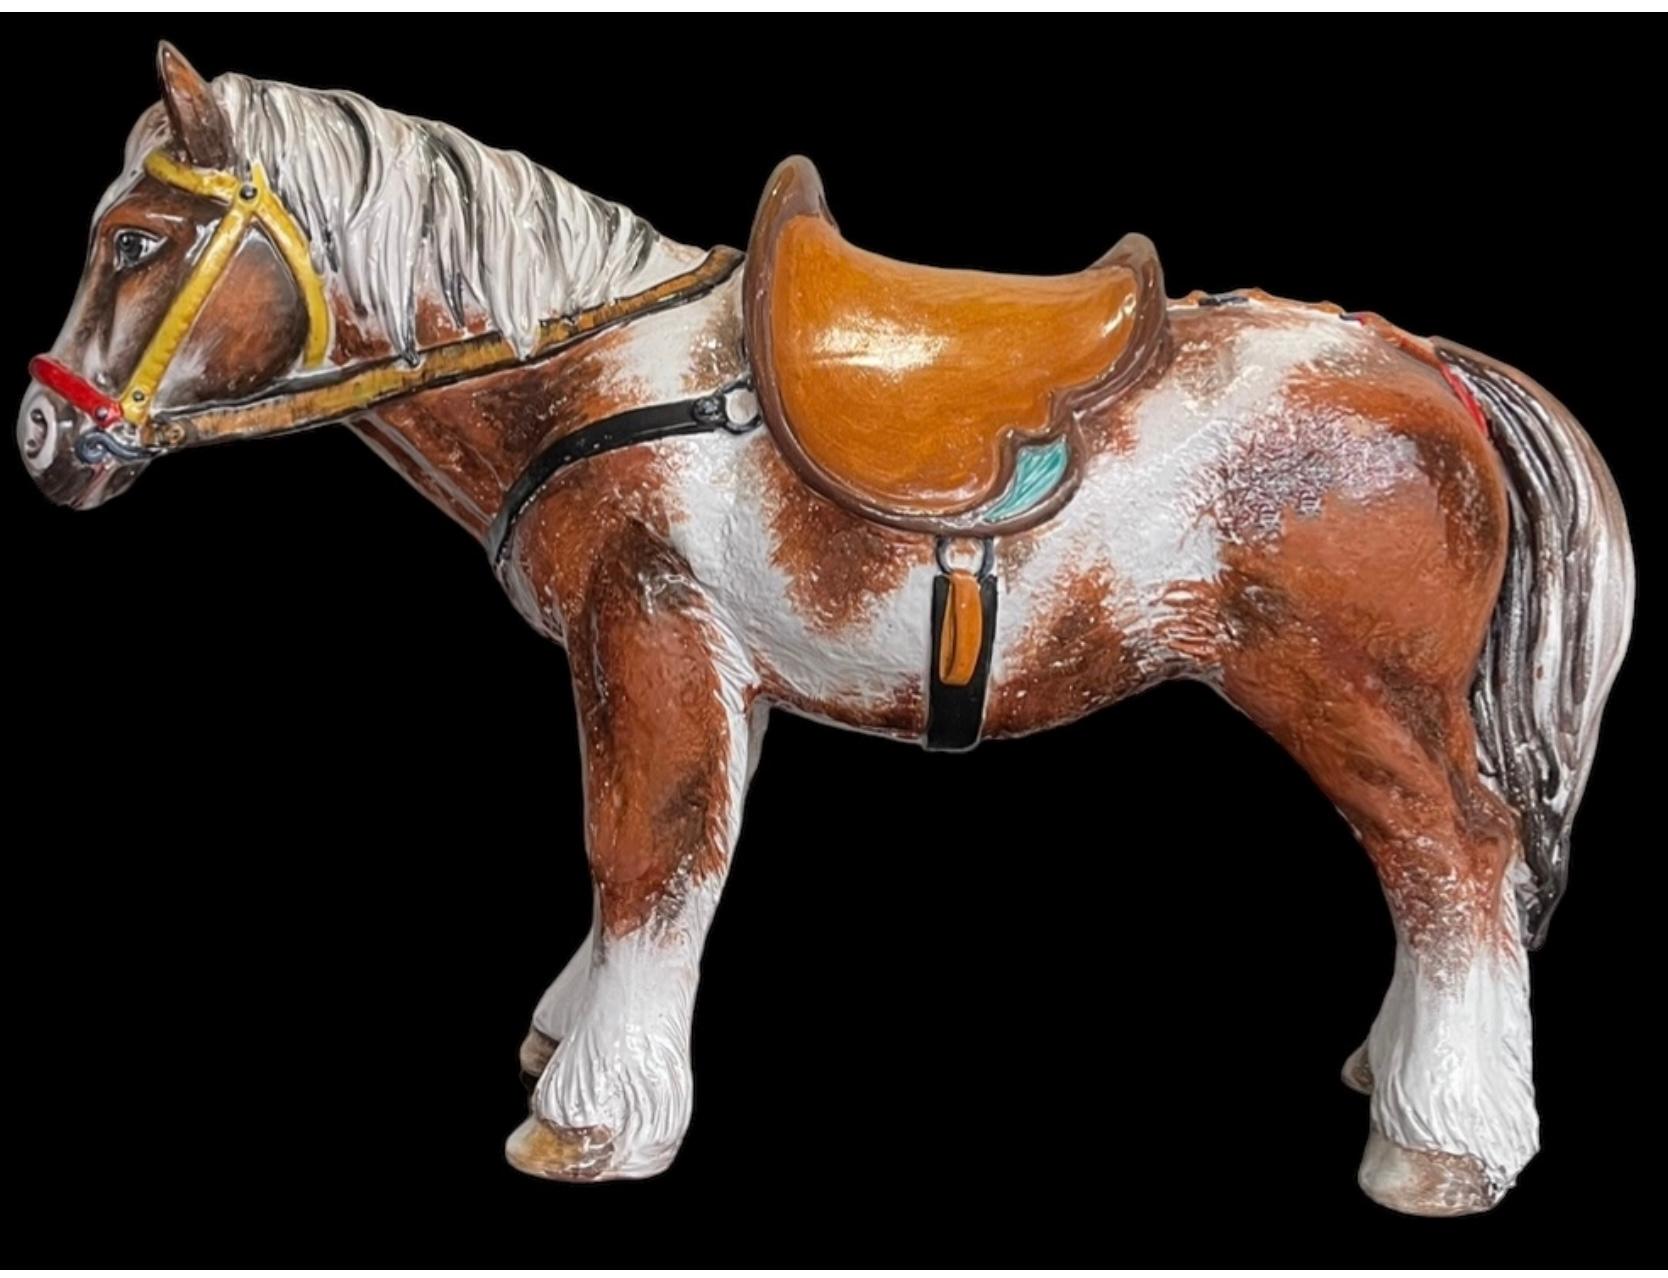 This is an amazing piece!  It is a Hollywood Regency Era Italian terracotta horse figurine. It appears to be a horse , as opposed to a pony, and the saddle and other accoutrement  are western in style. The thirty-eight inches in length is enormous